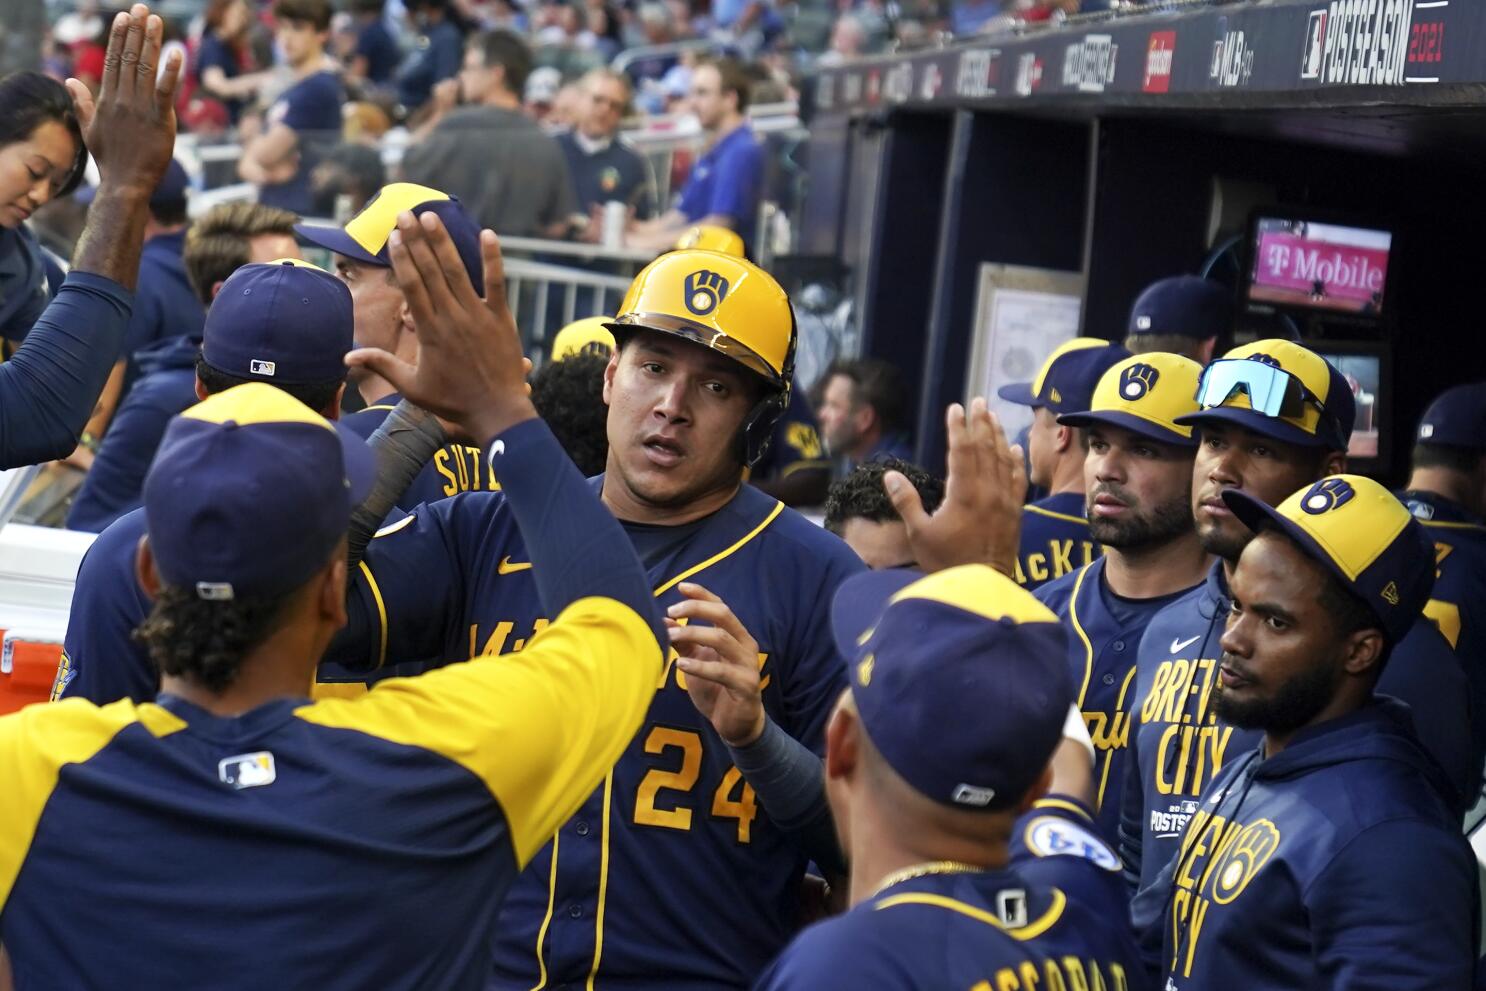 Brewers: 5 Offseason Moves To Win The 2021 World Series